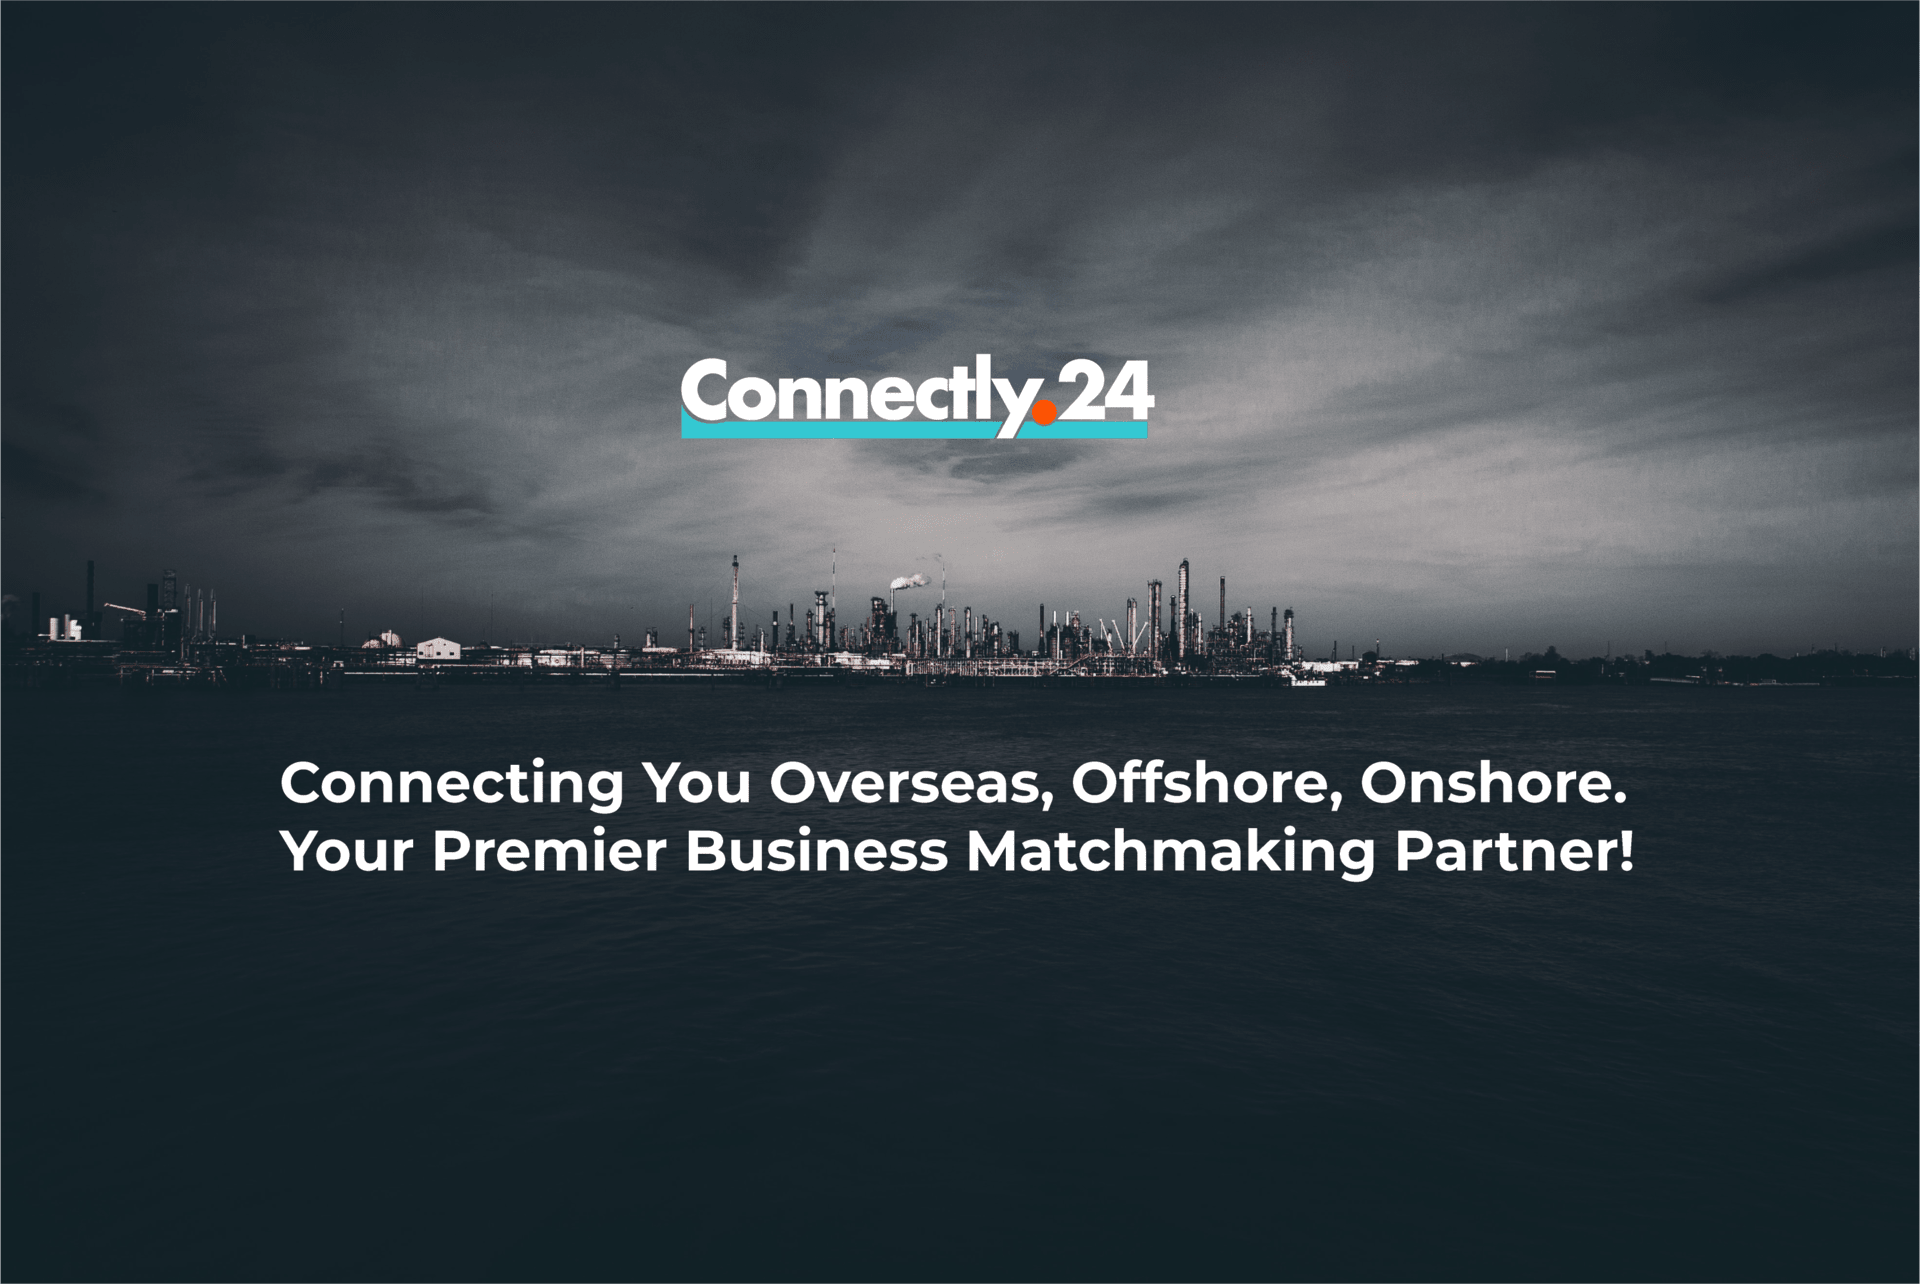 Welcome To Connectly24